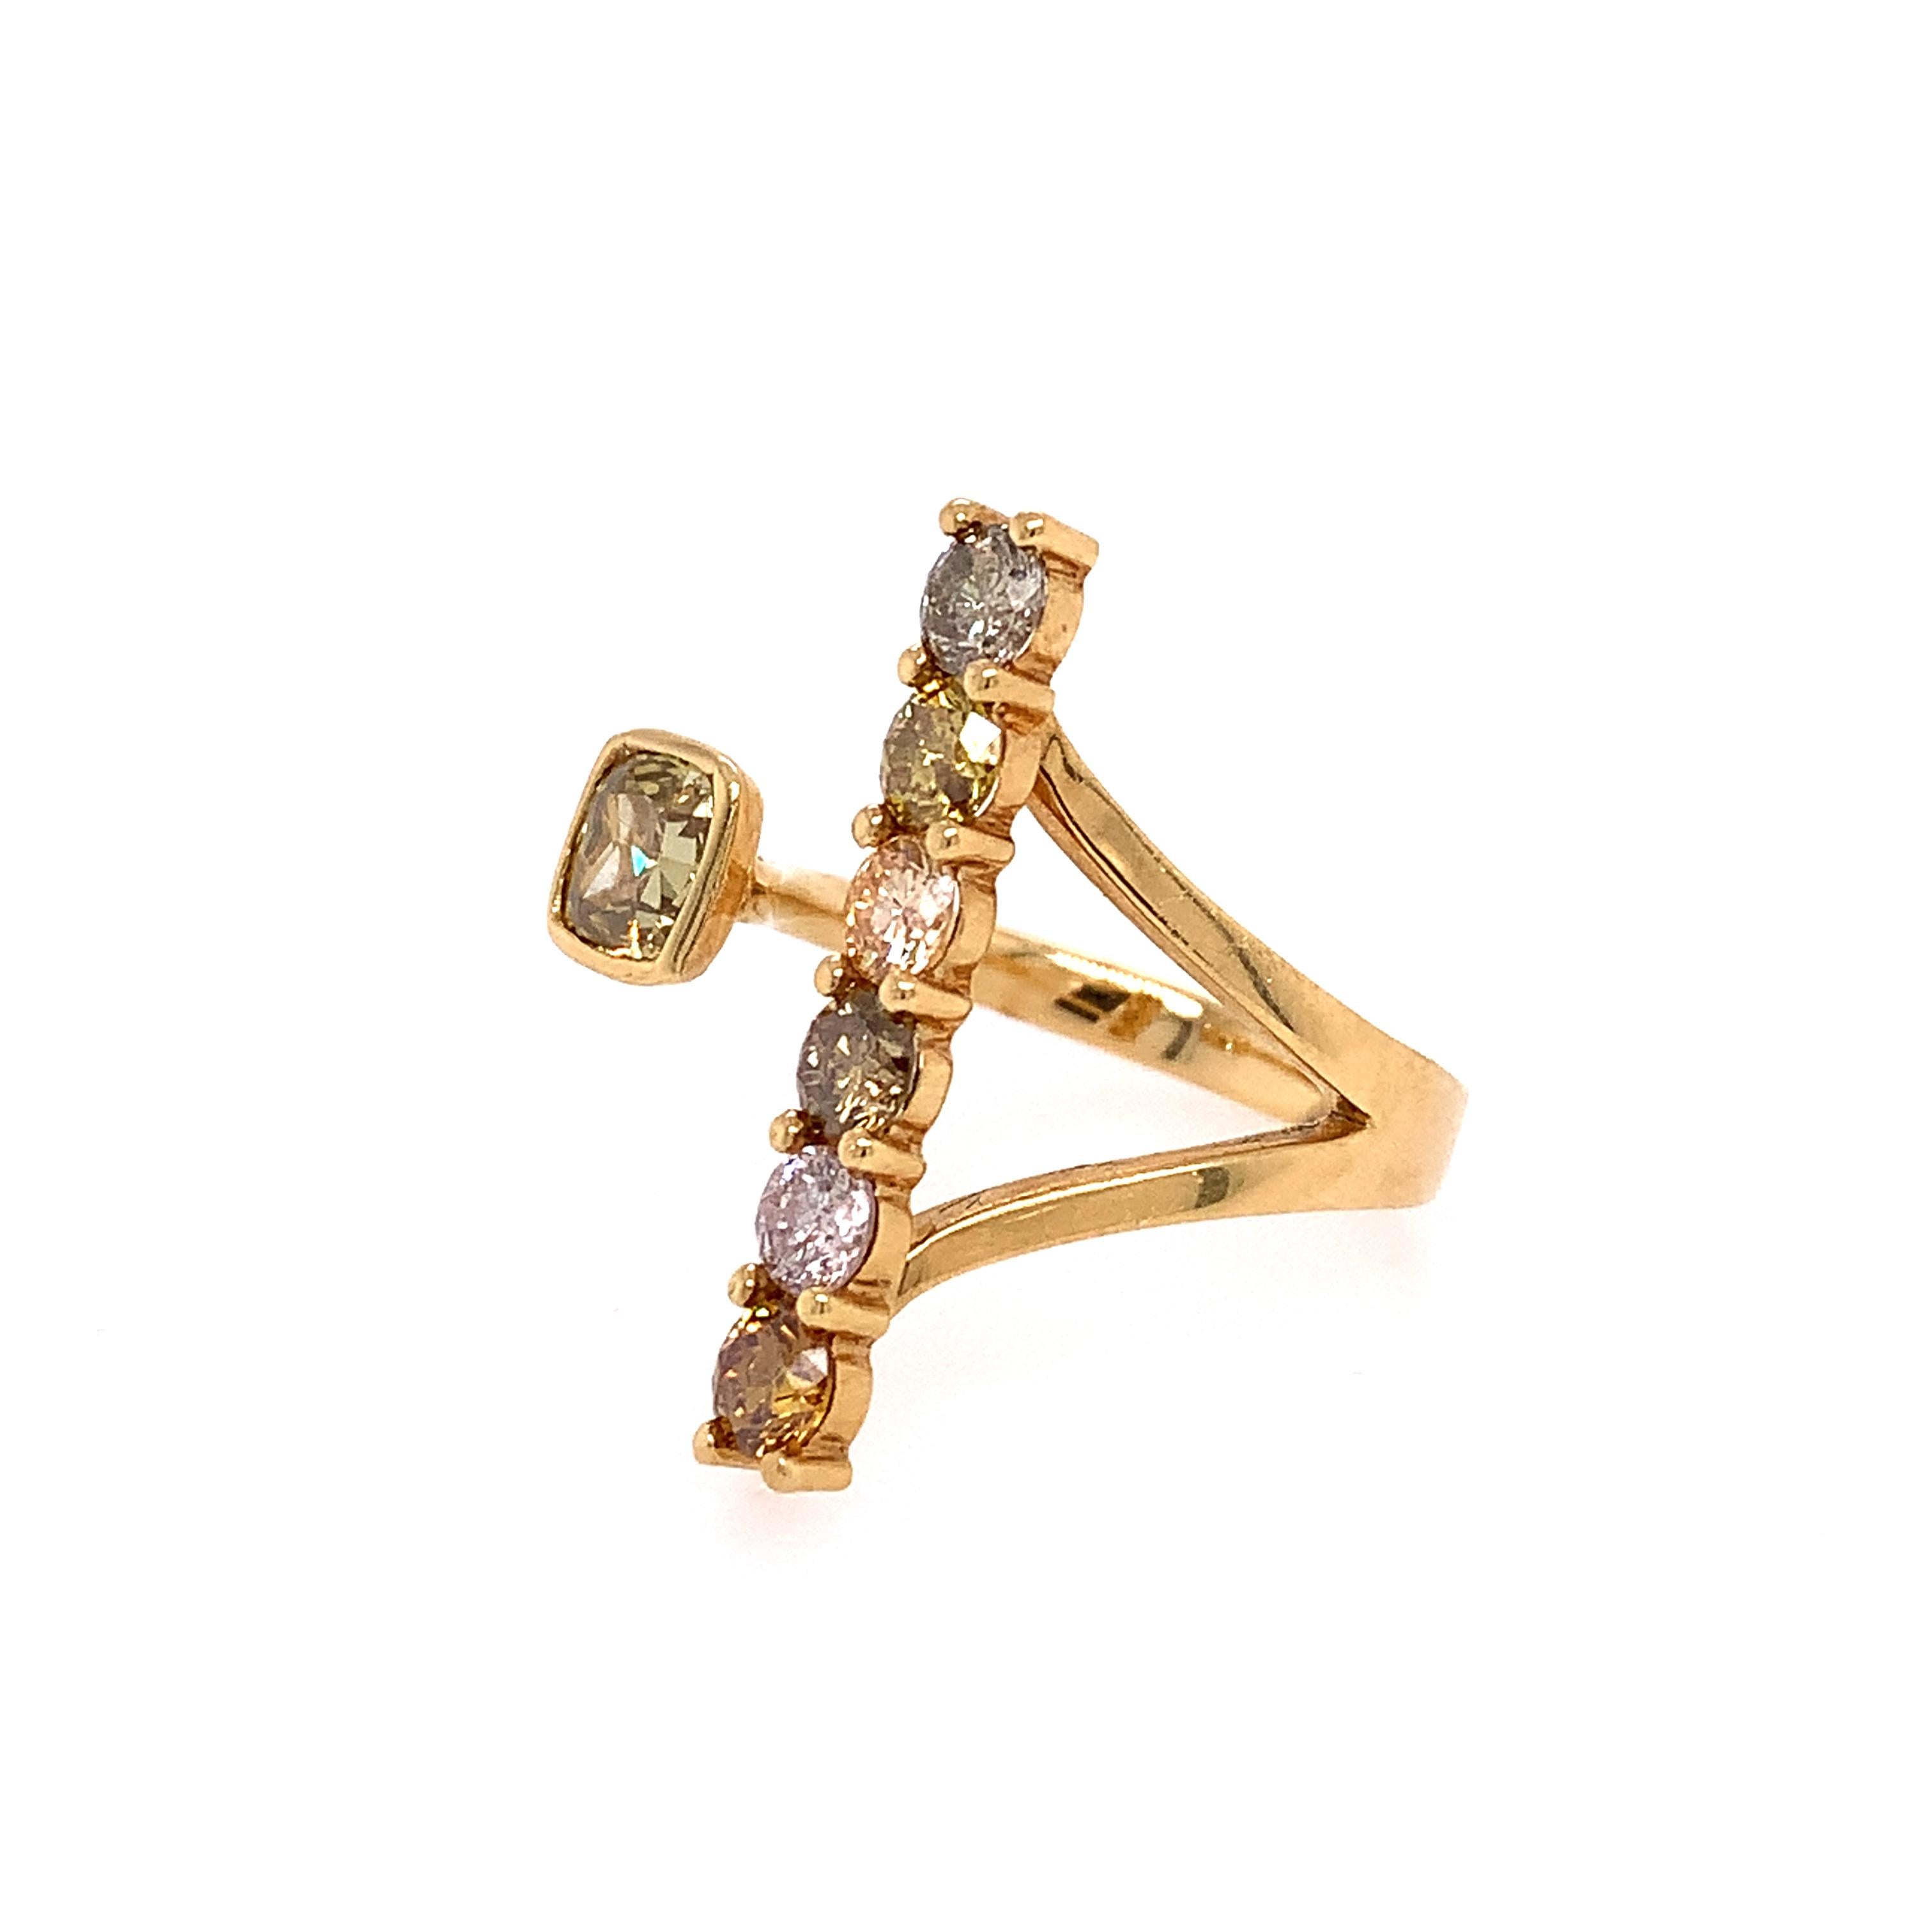 18K Yellow Gold
Fancy color Diamond: 1.96ct total weight
All diamonds are G-H/SI stones